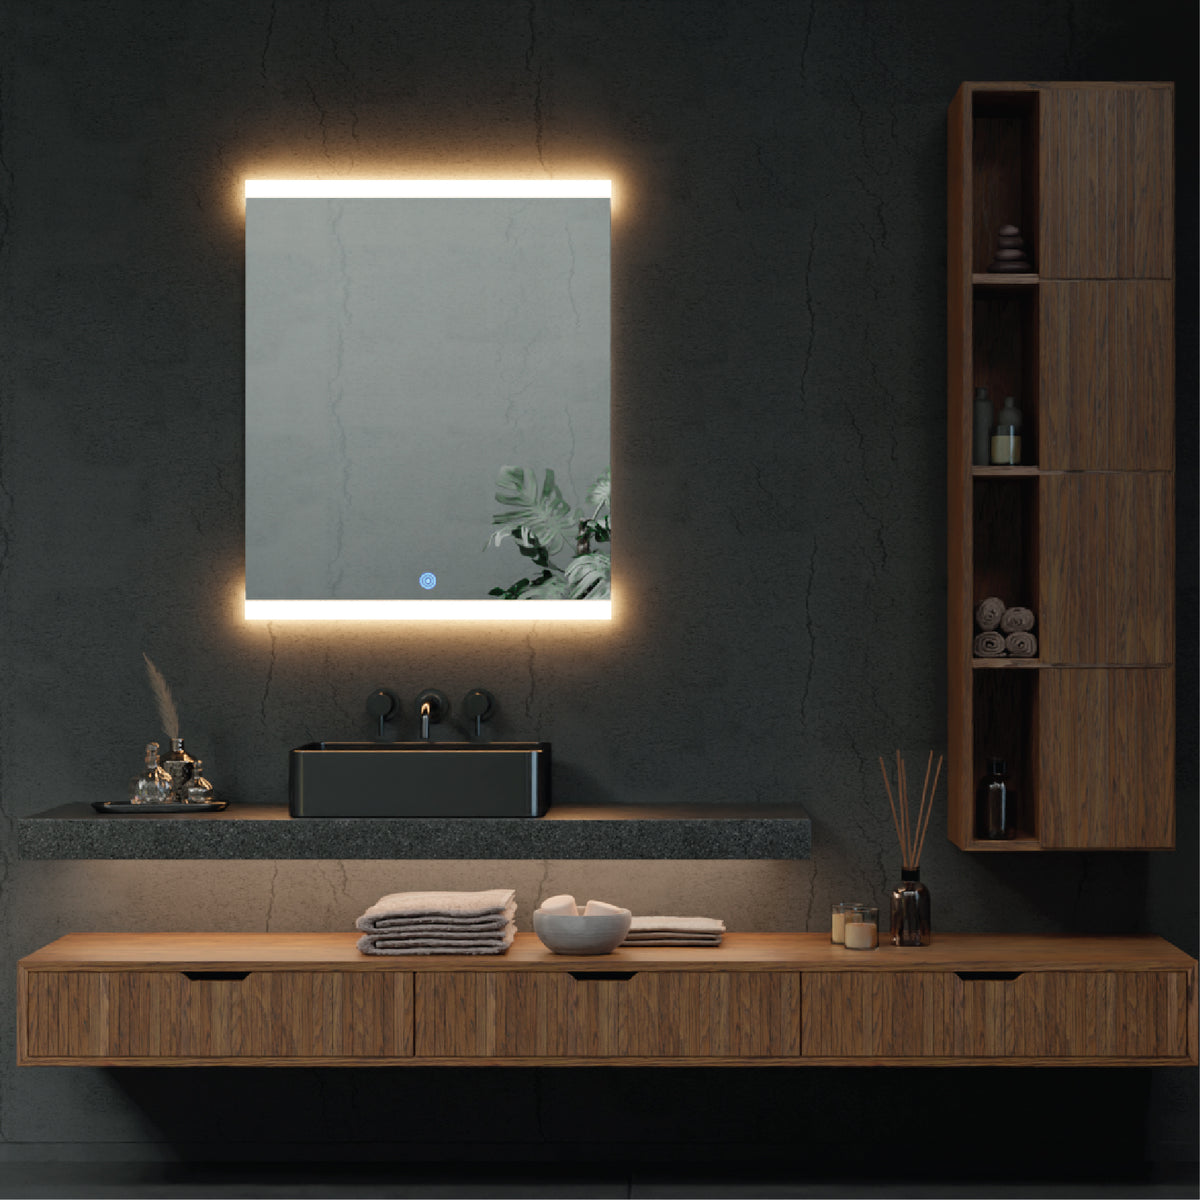 Enjoy the modern aesthetic of the Titan LED Mirror, designed for both style and functionality.